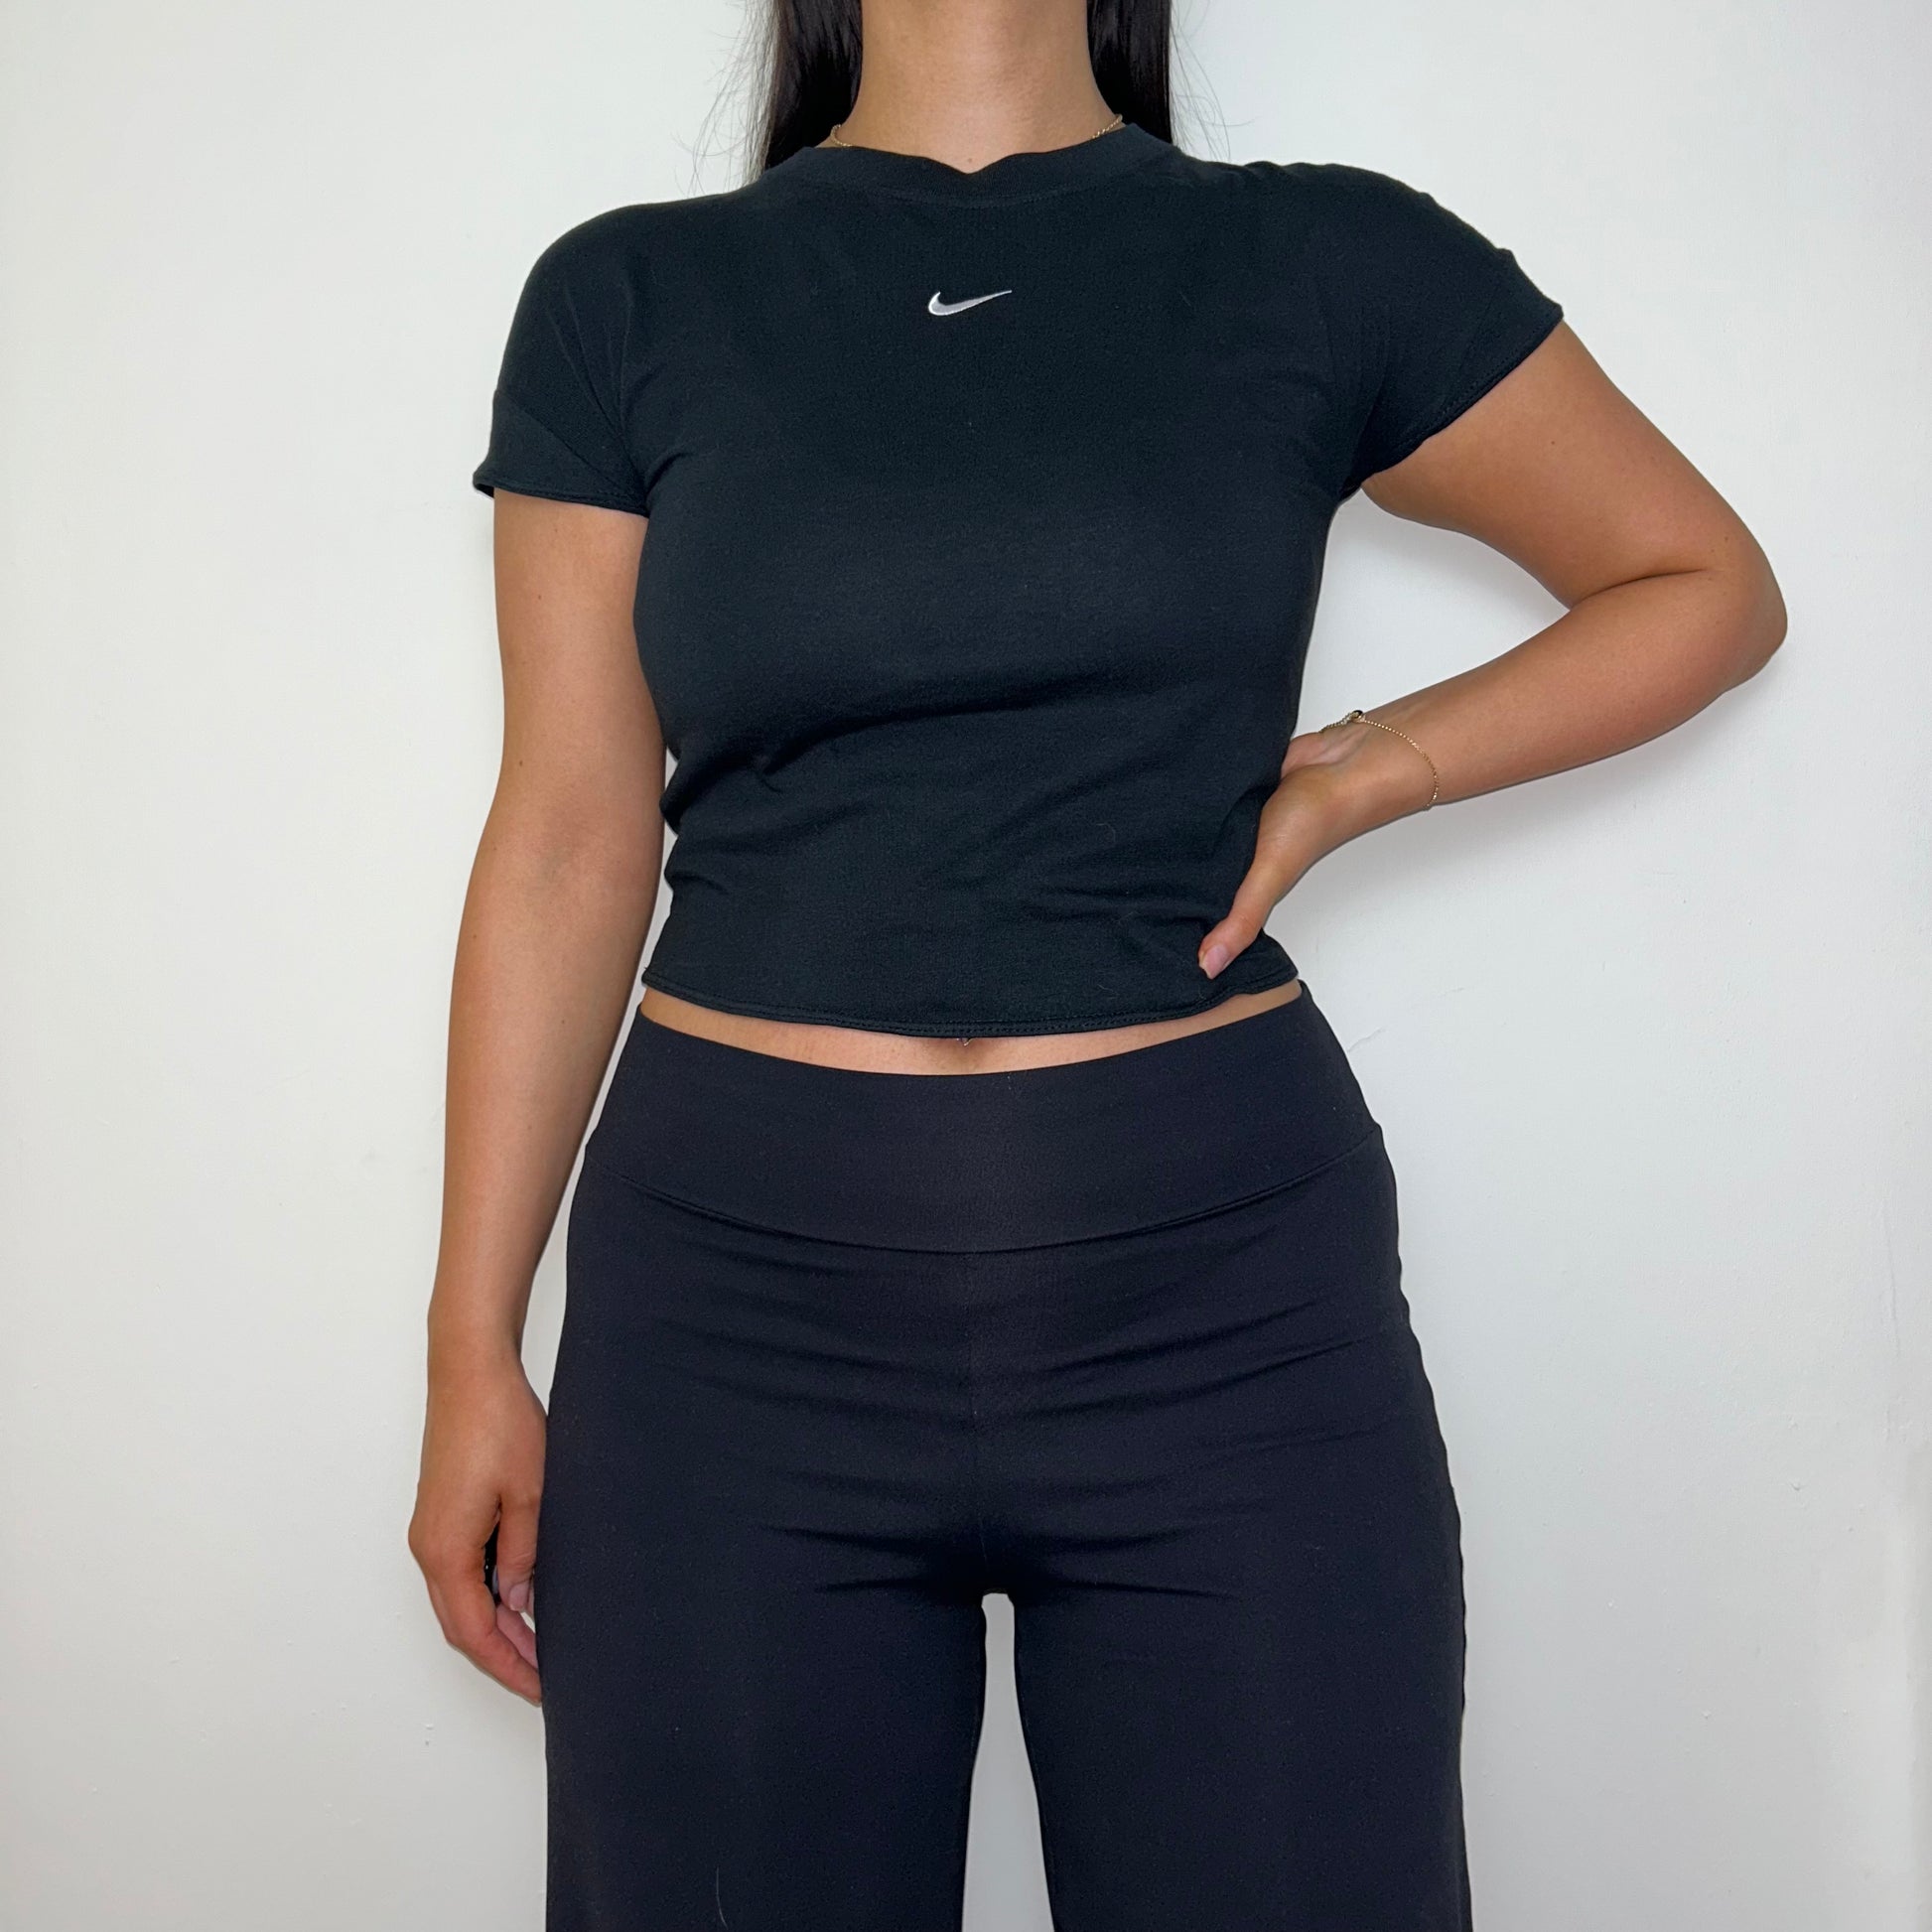 black short sleeve crop top with white nike swoosh logo shown on a model wearing black trousers